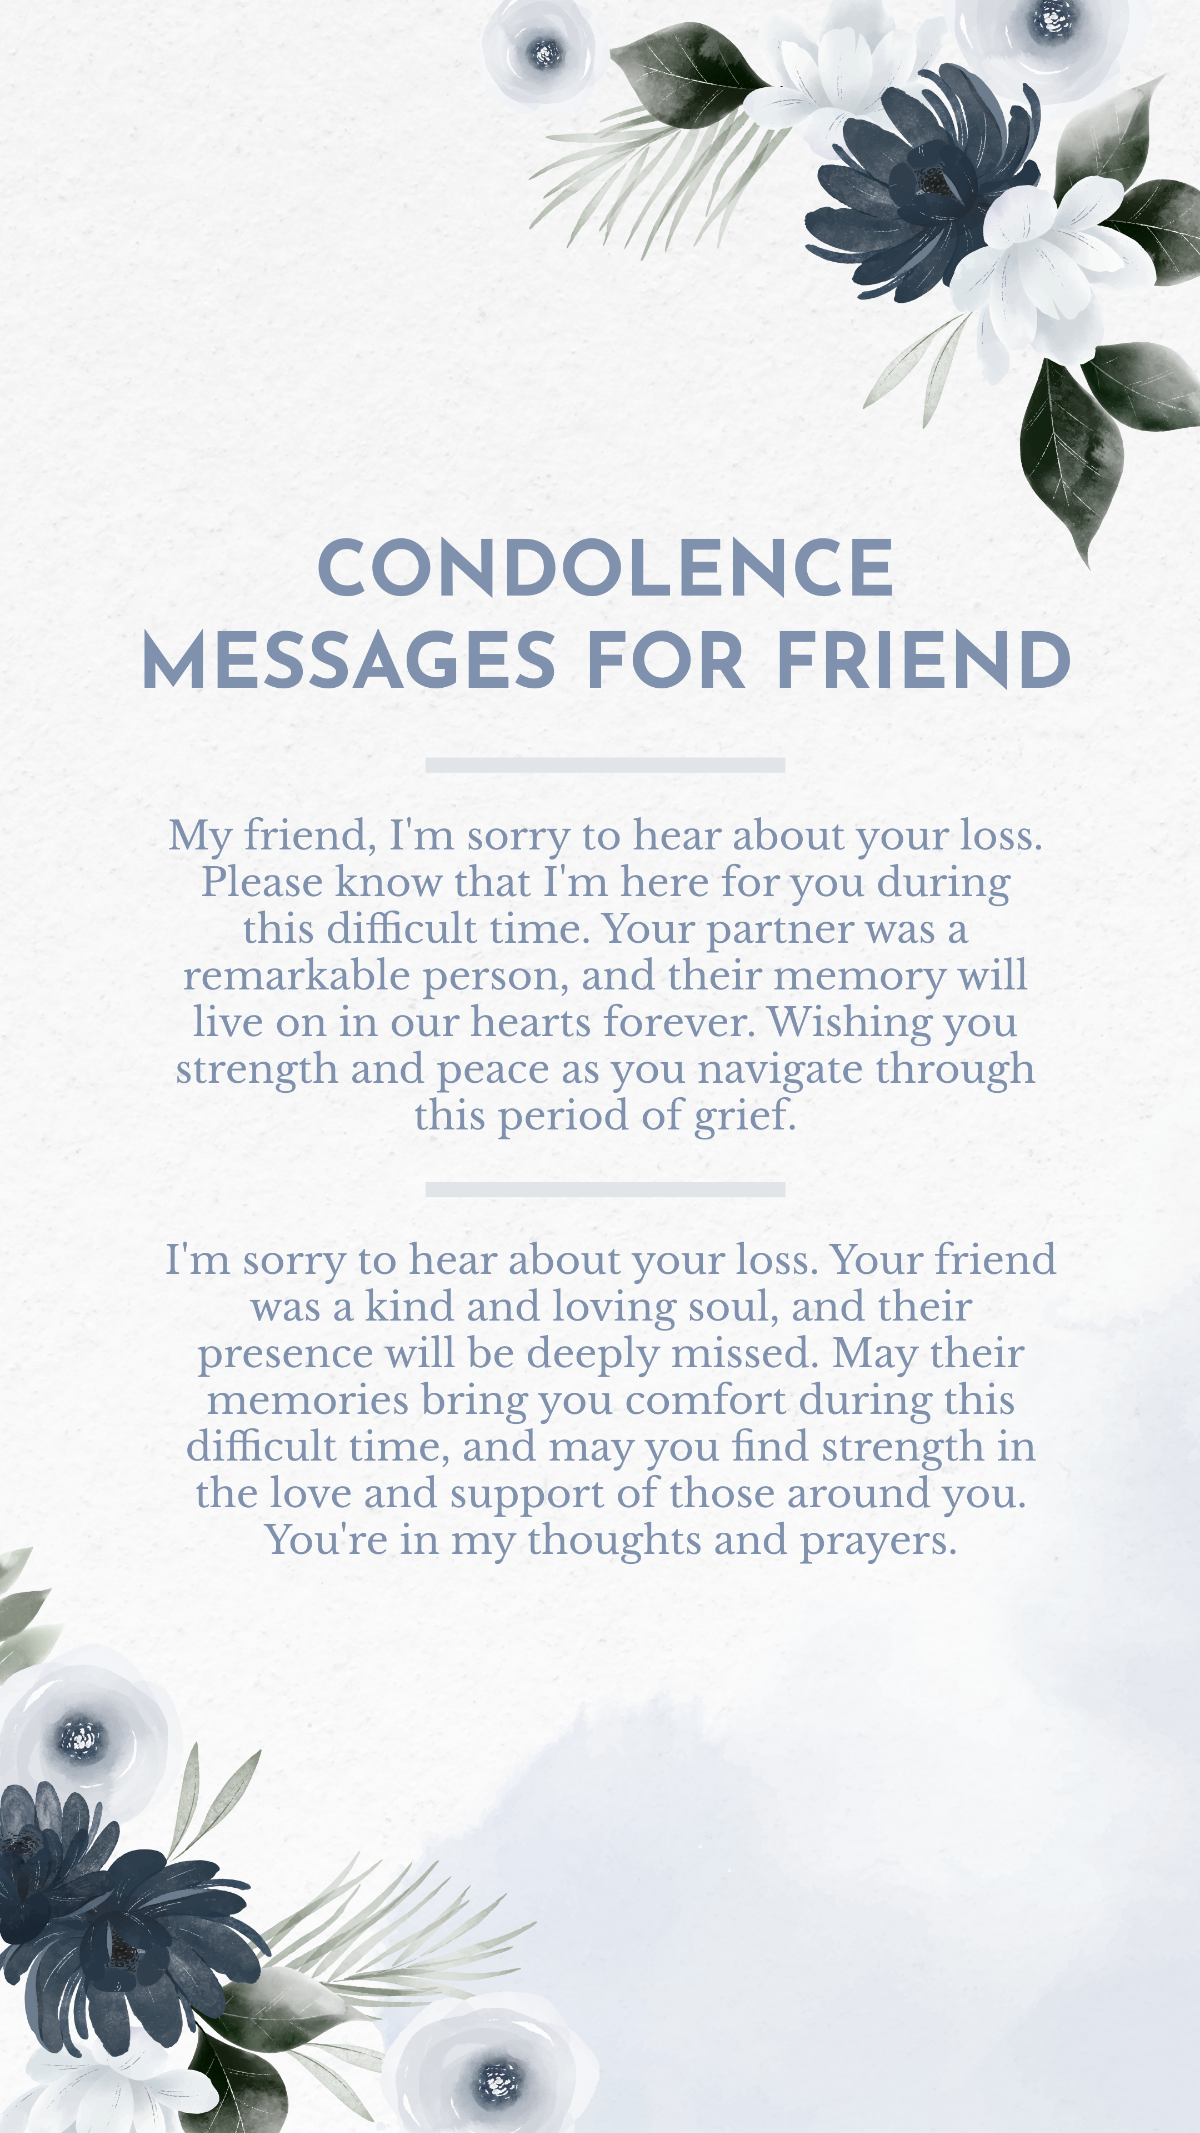 Condolence Messages For Friend